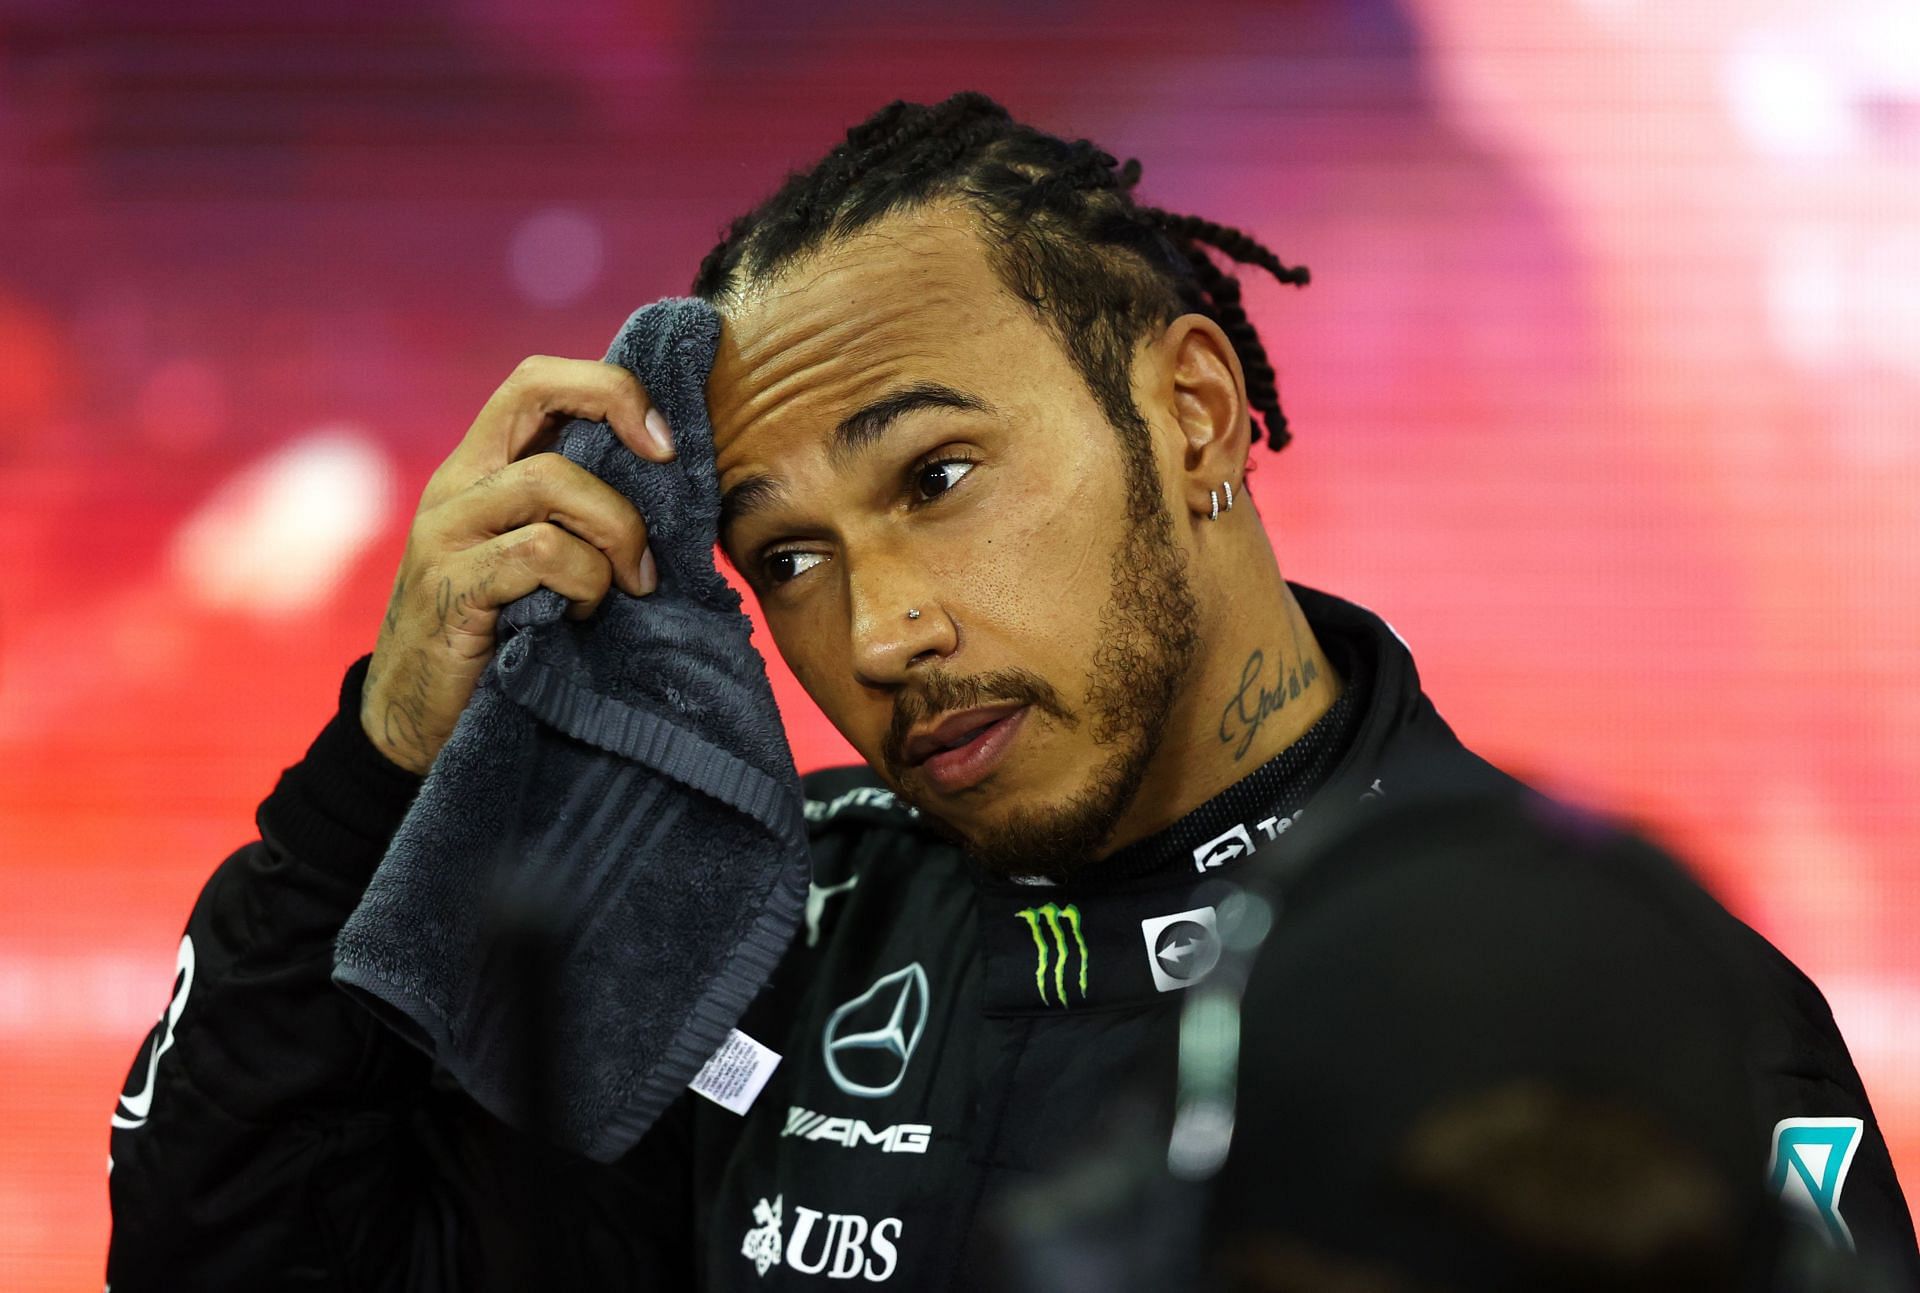 Lewis Hamilton is coming back with a bang, according to F1 pundits